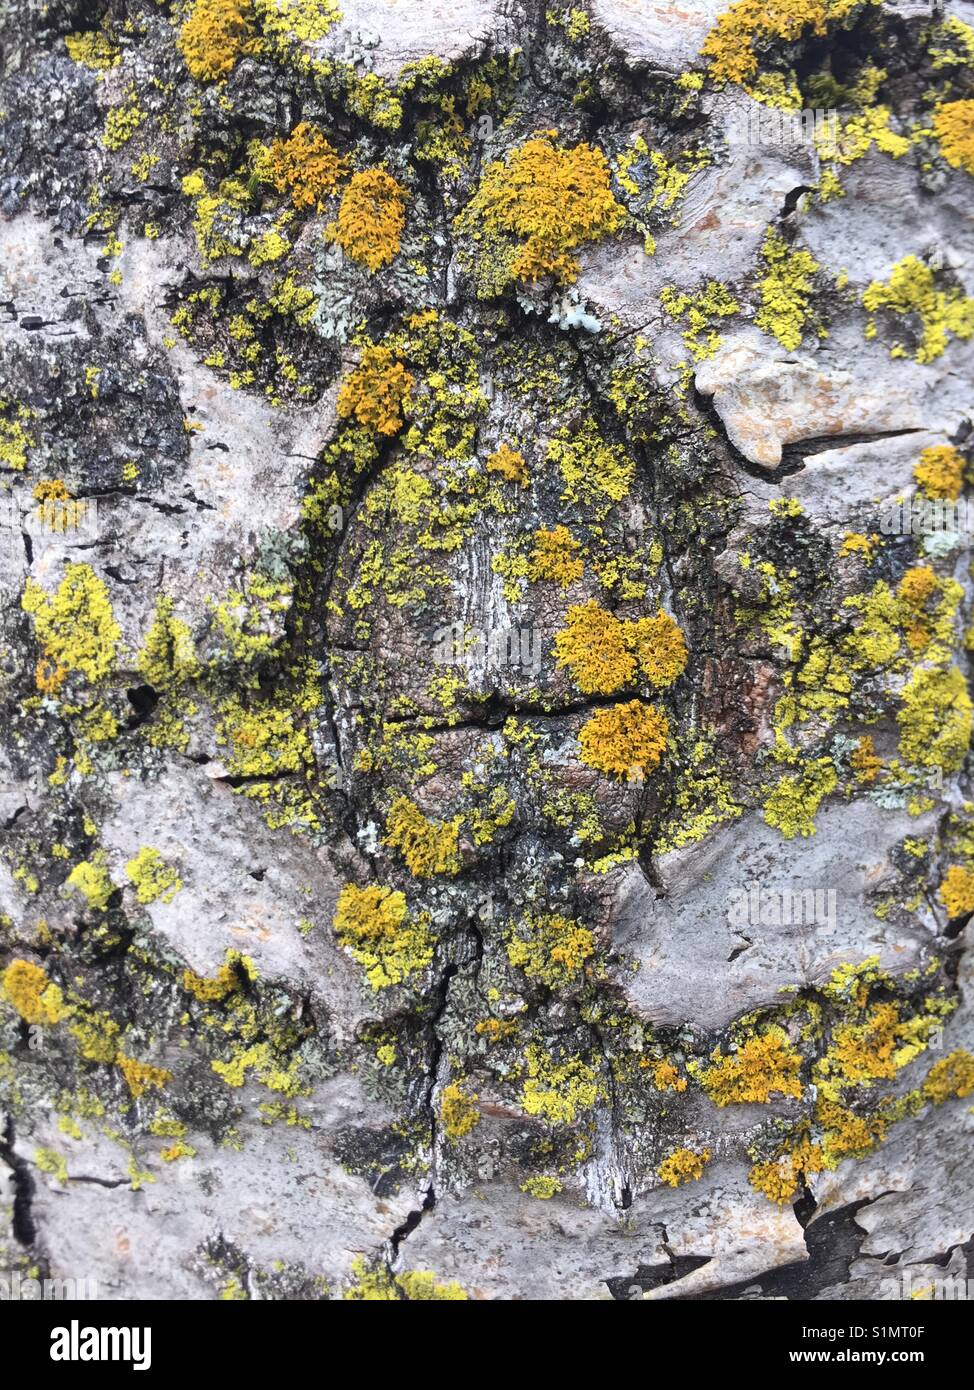 Colorful lichen growing on tree bark Stock Photo